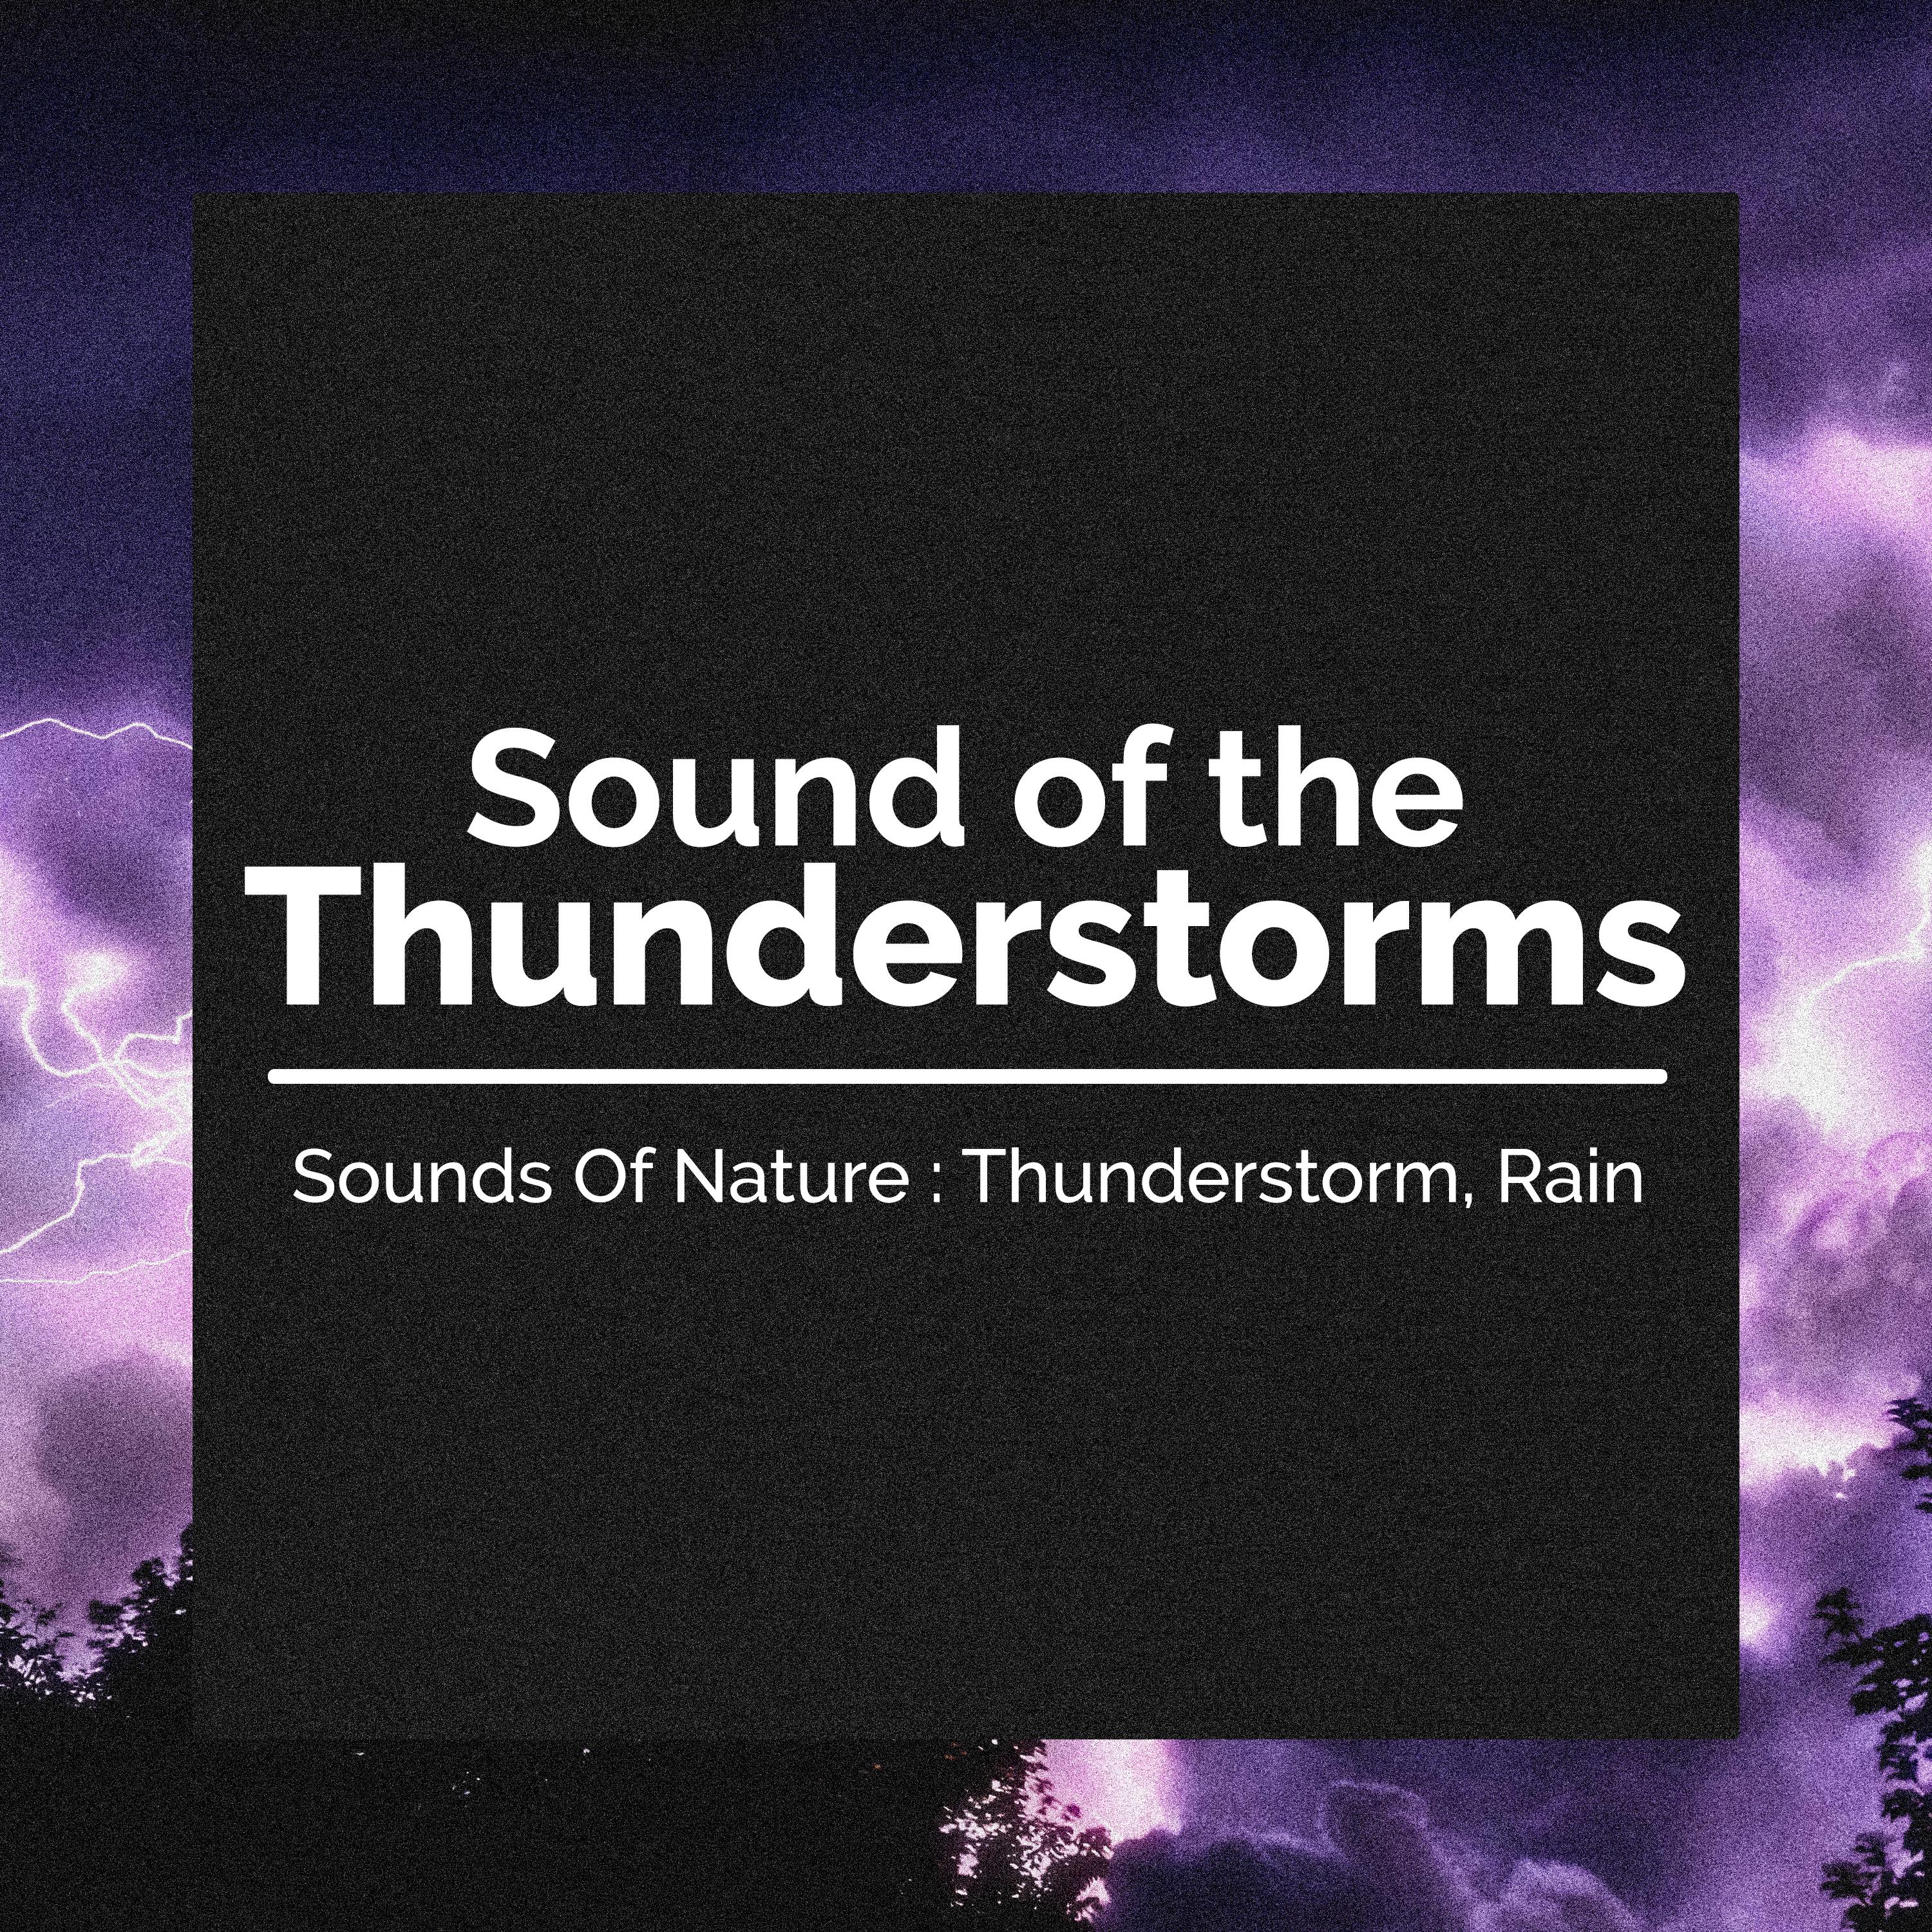 Sound of the Thunderstorms